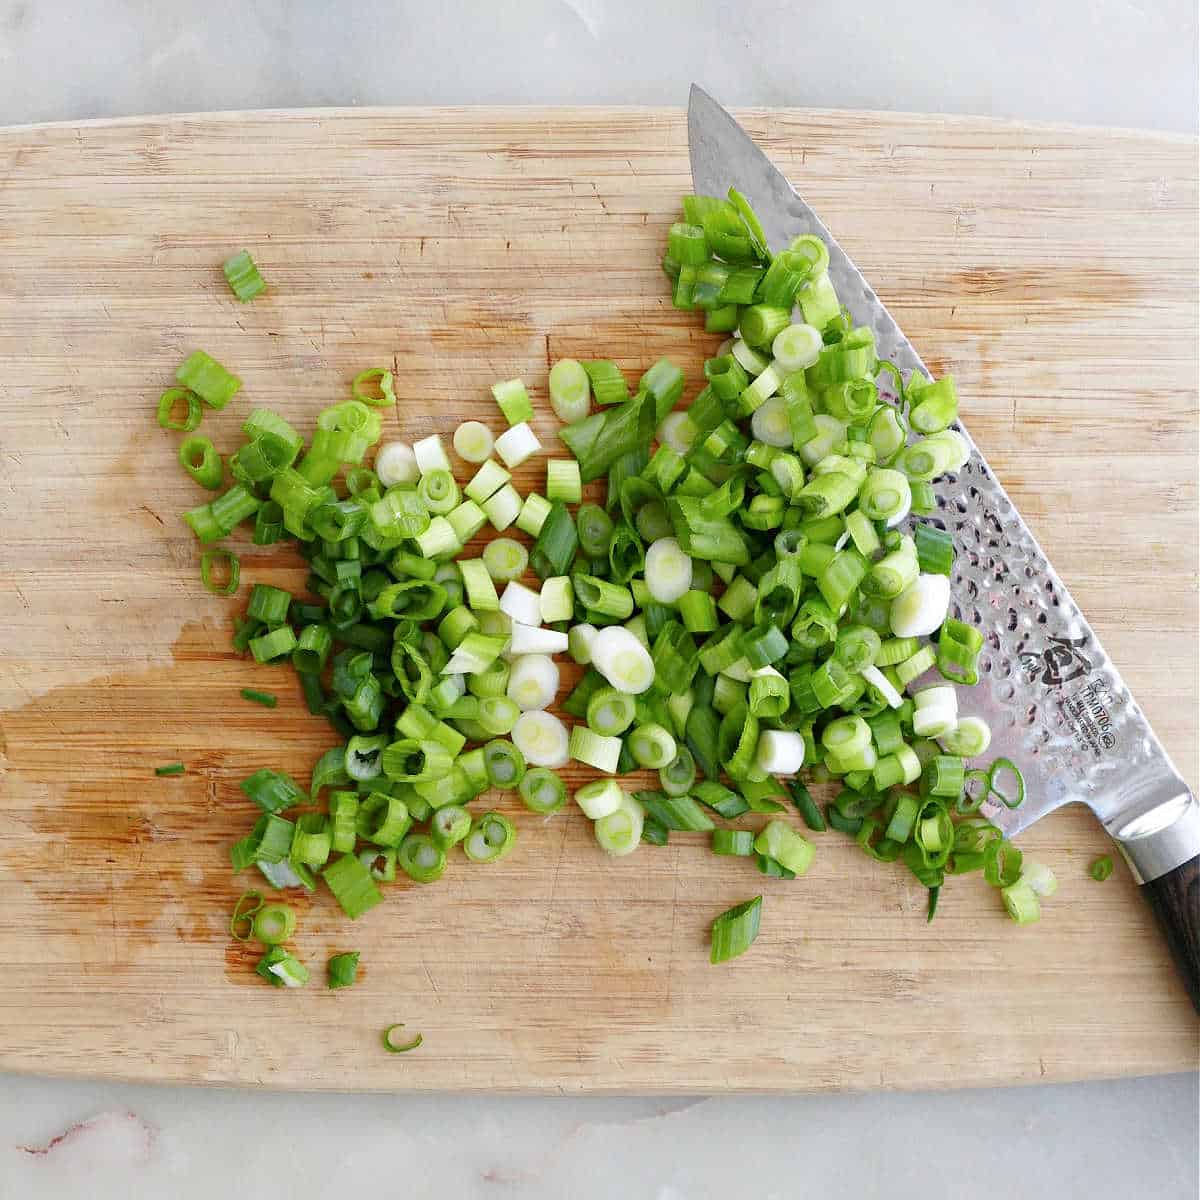 sliced green onions on a cutting board next to a chef's knife